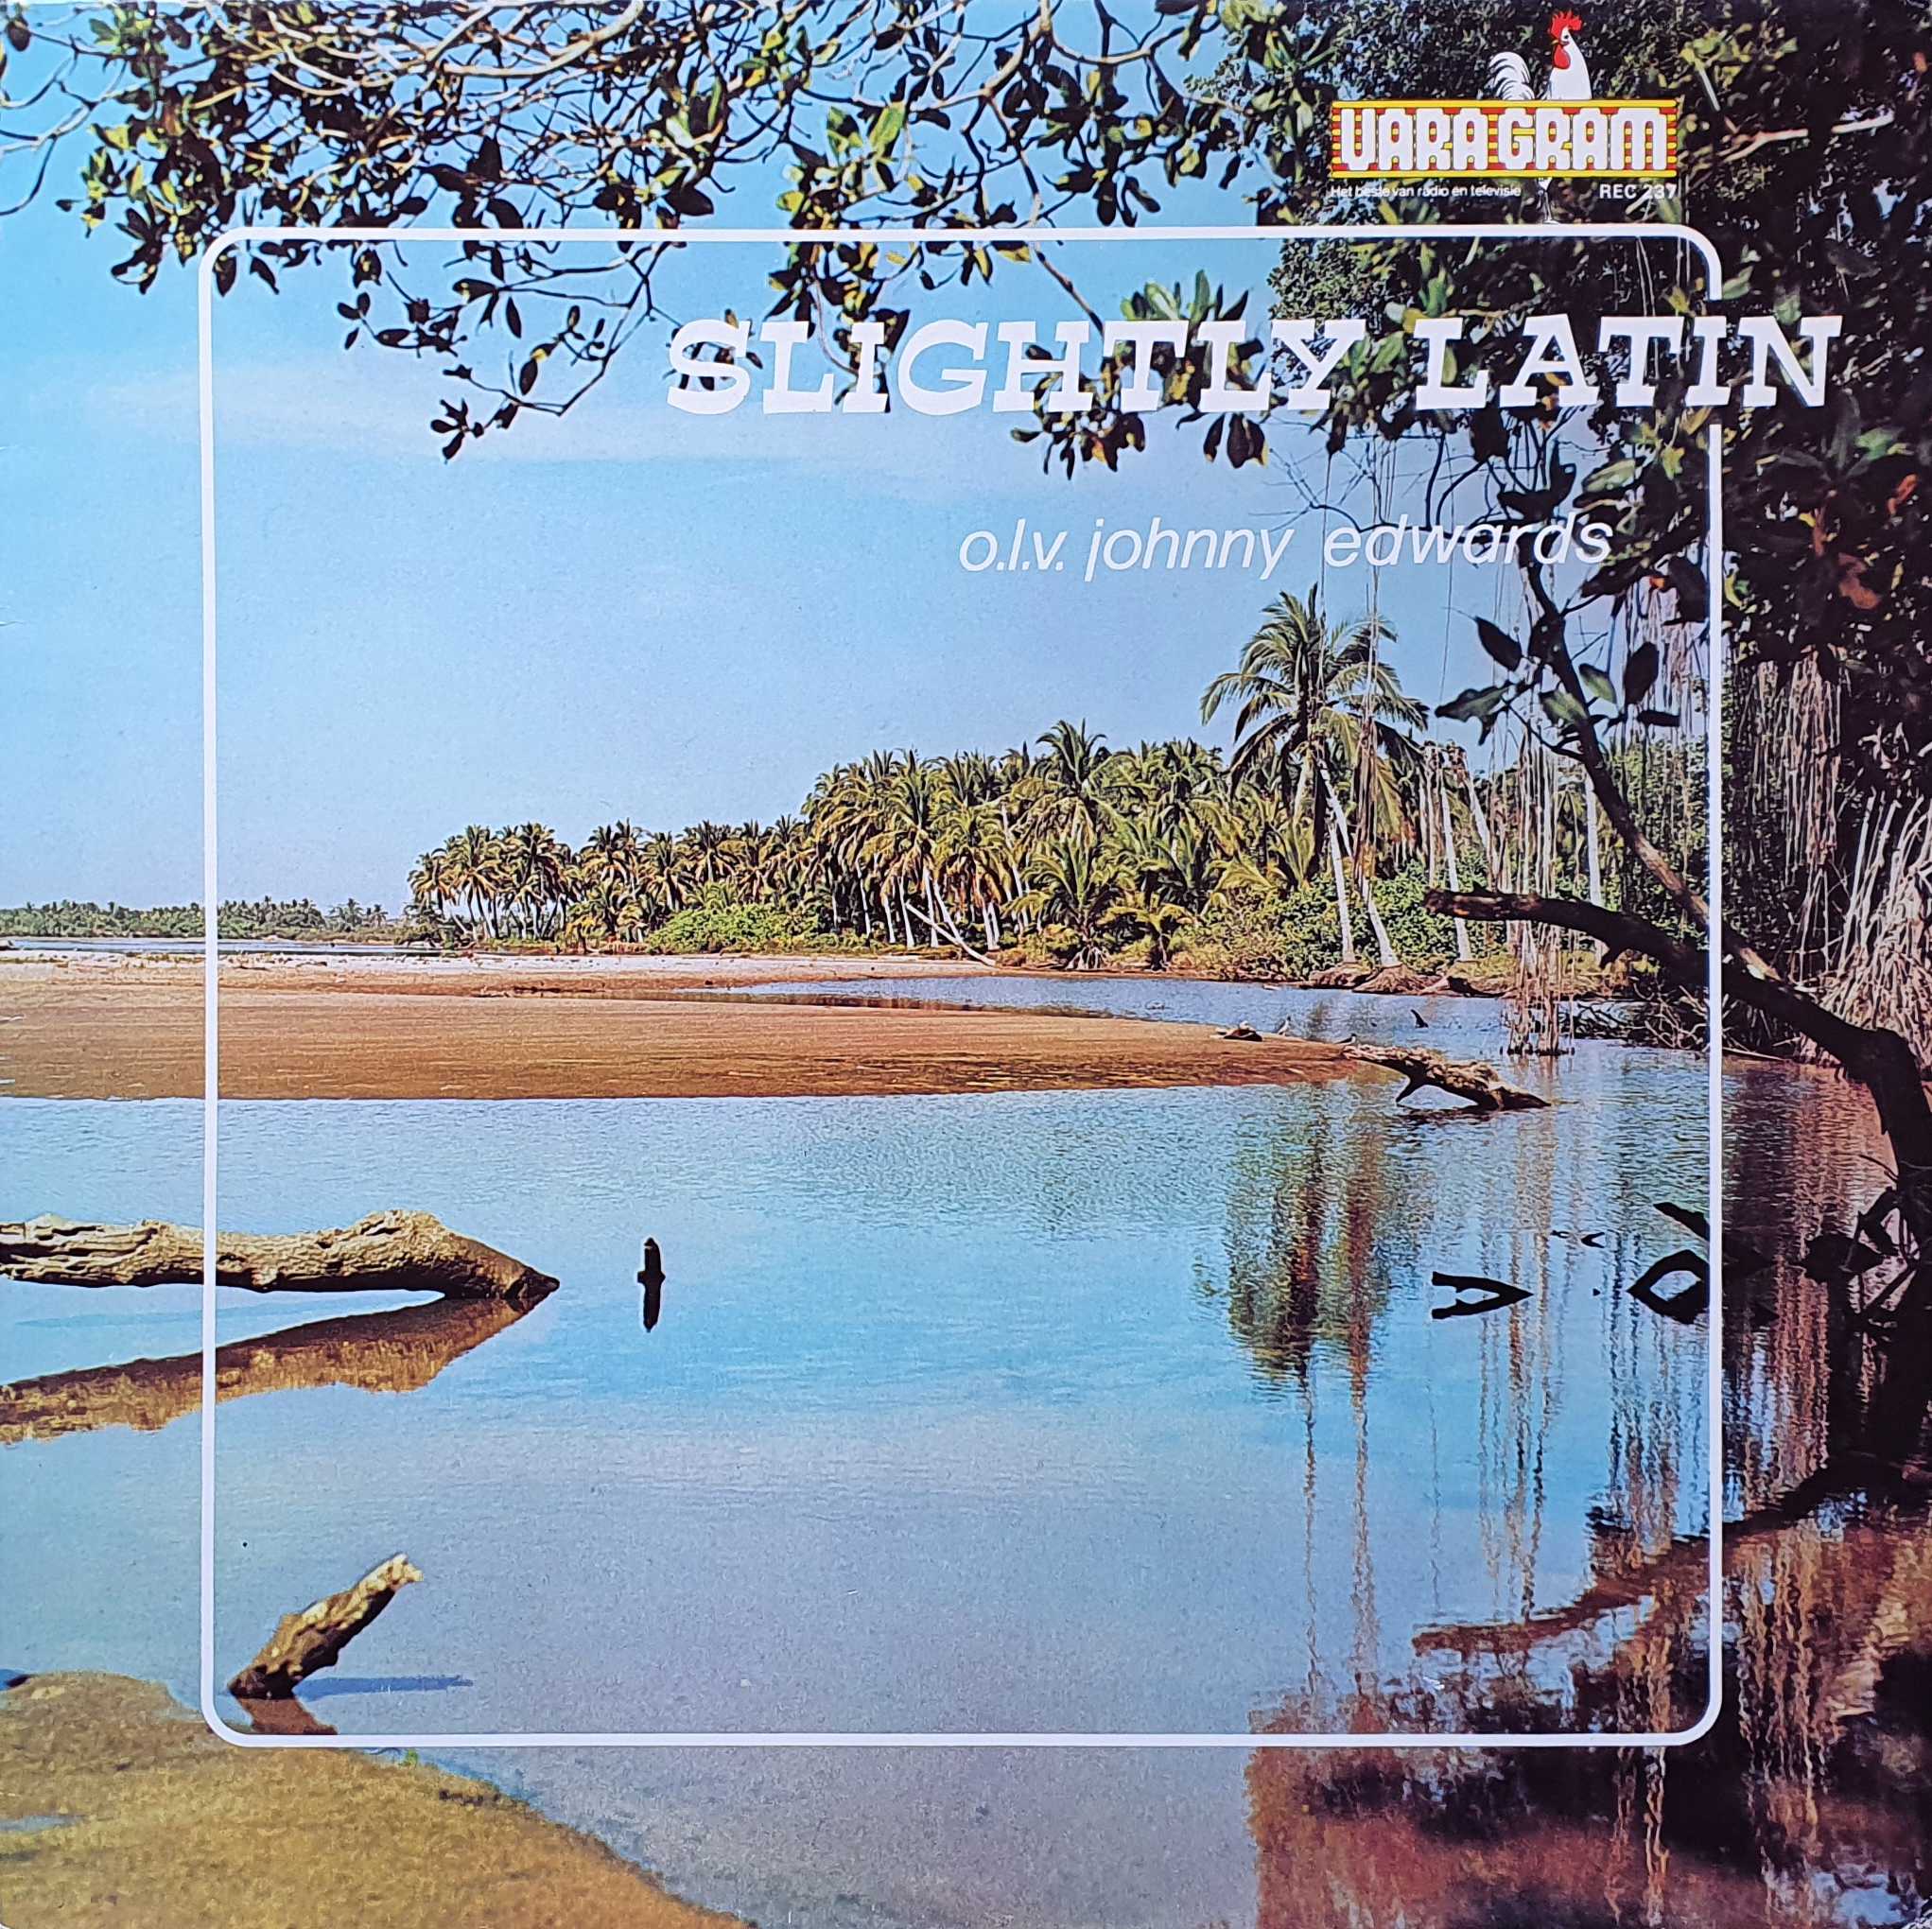 Picture of REC 237-iD Slightly Latin by artist Various from the BBC albums - Records and Tapes library